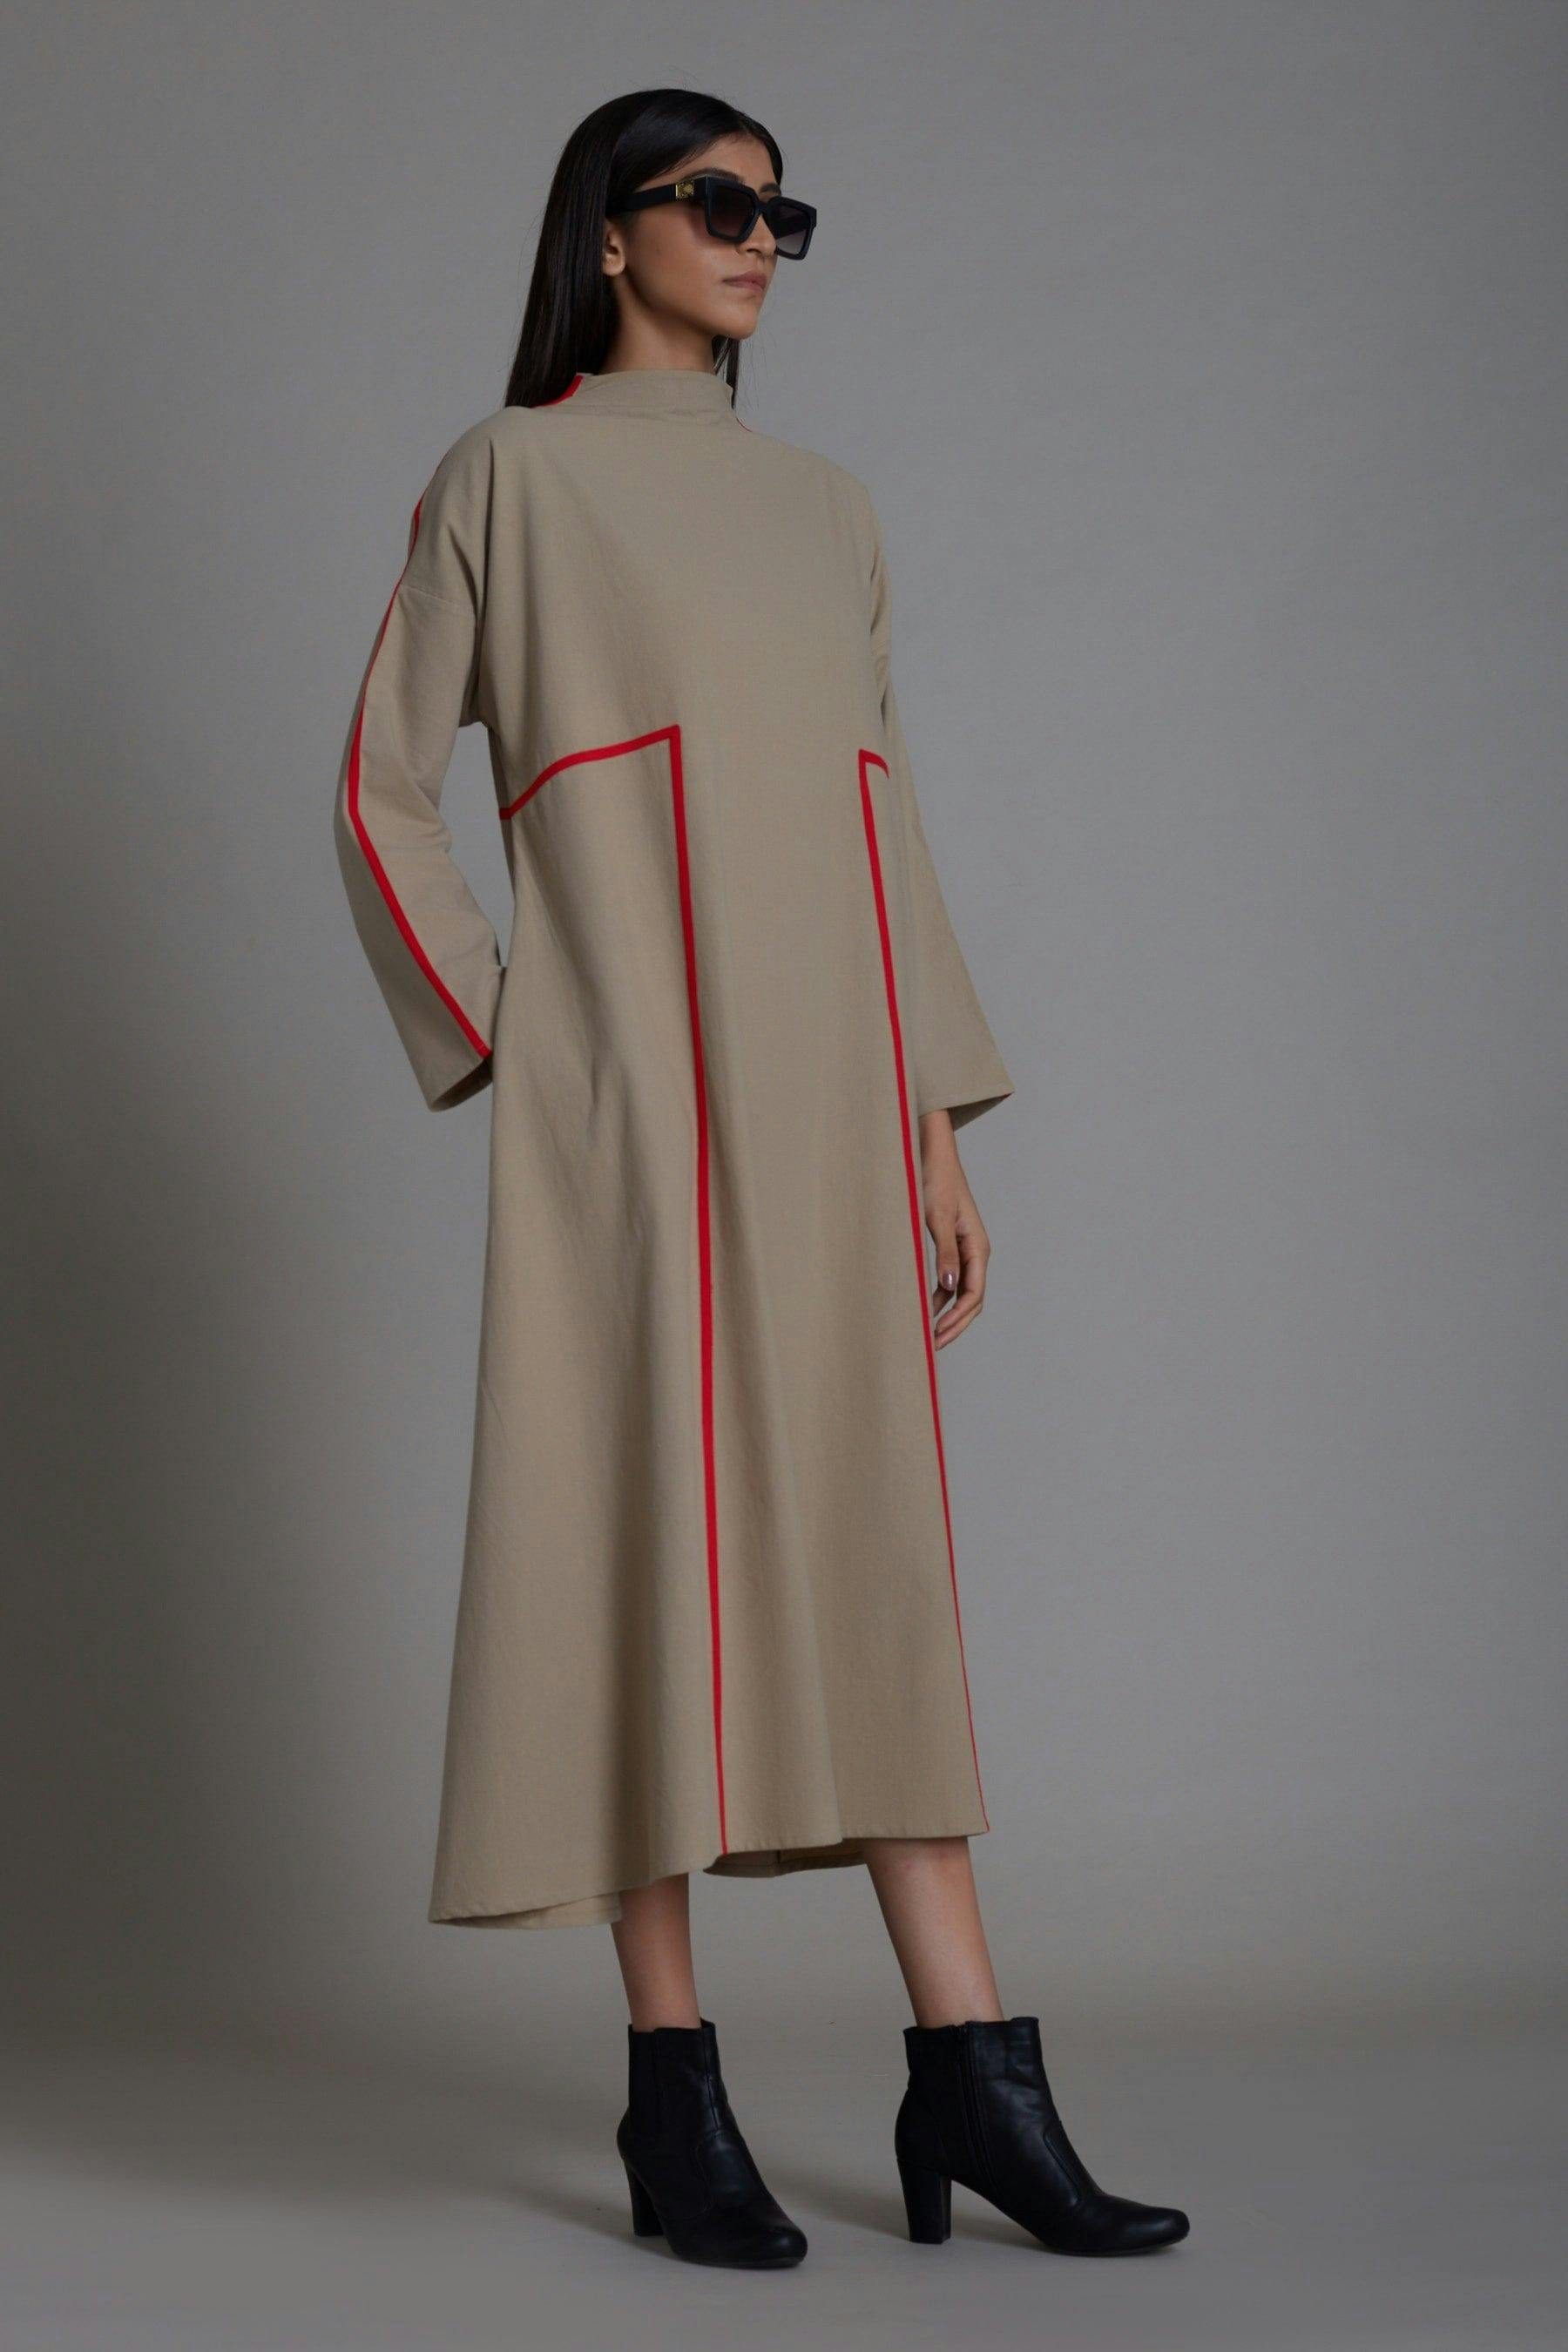 Beige & Red Piping Dress, a product by Style Mati